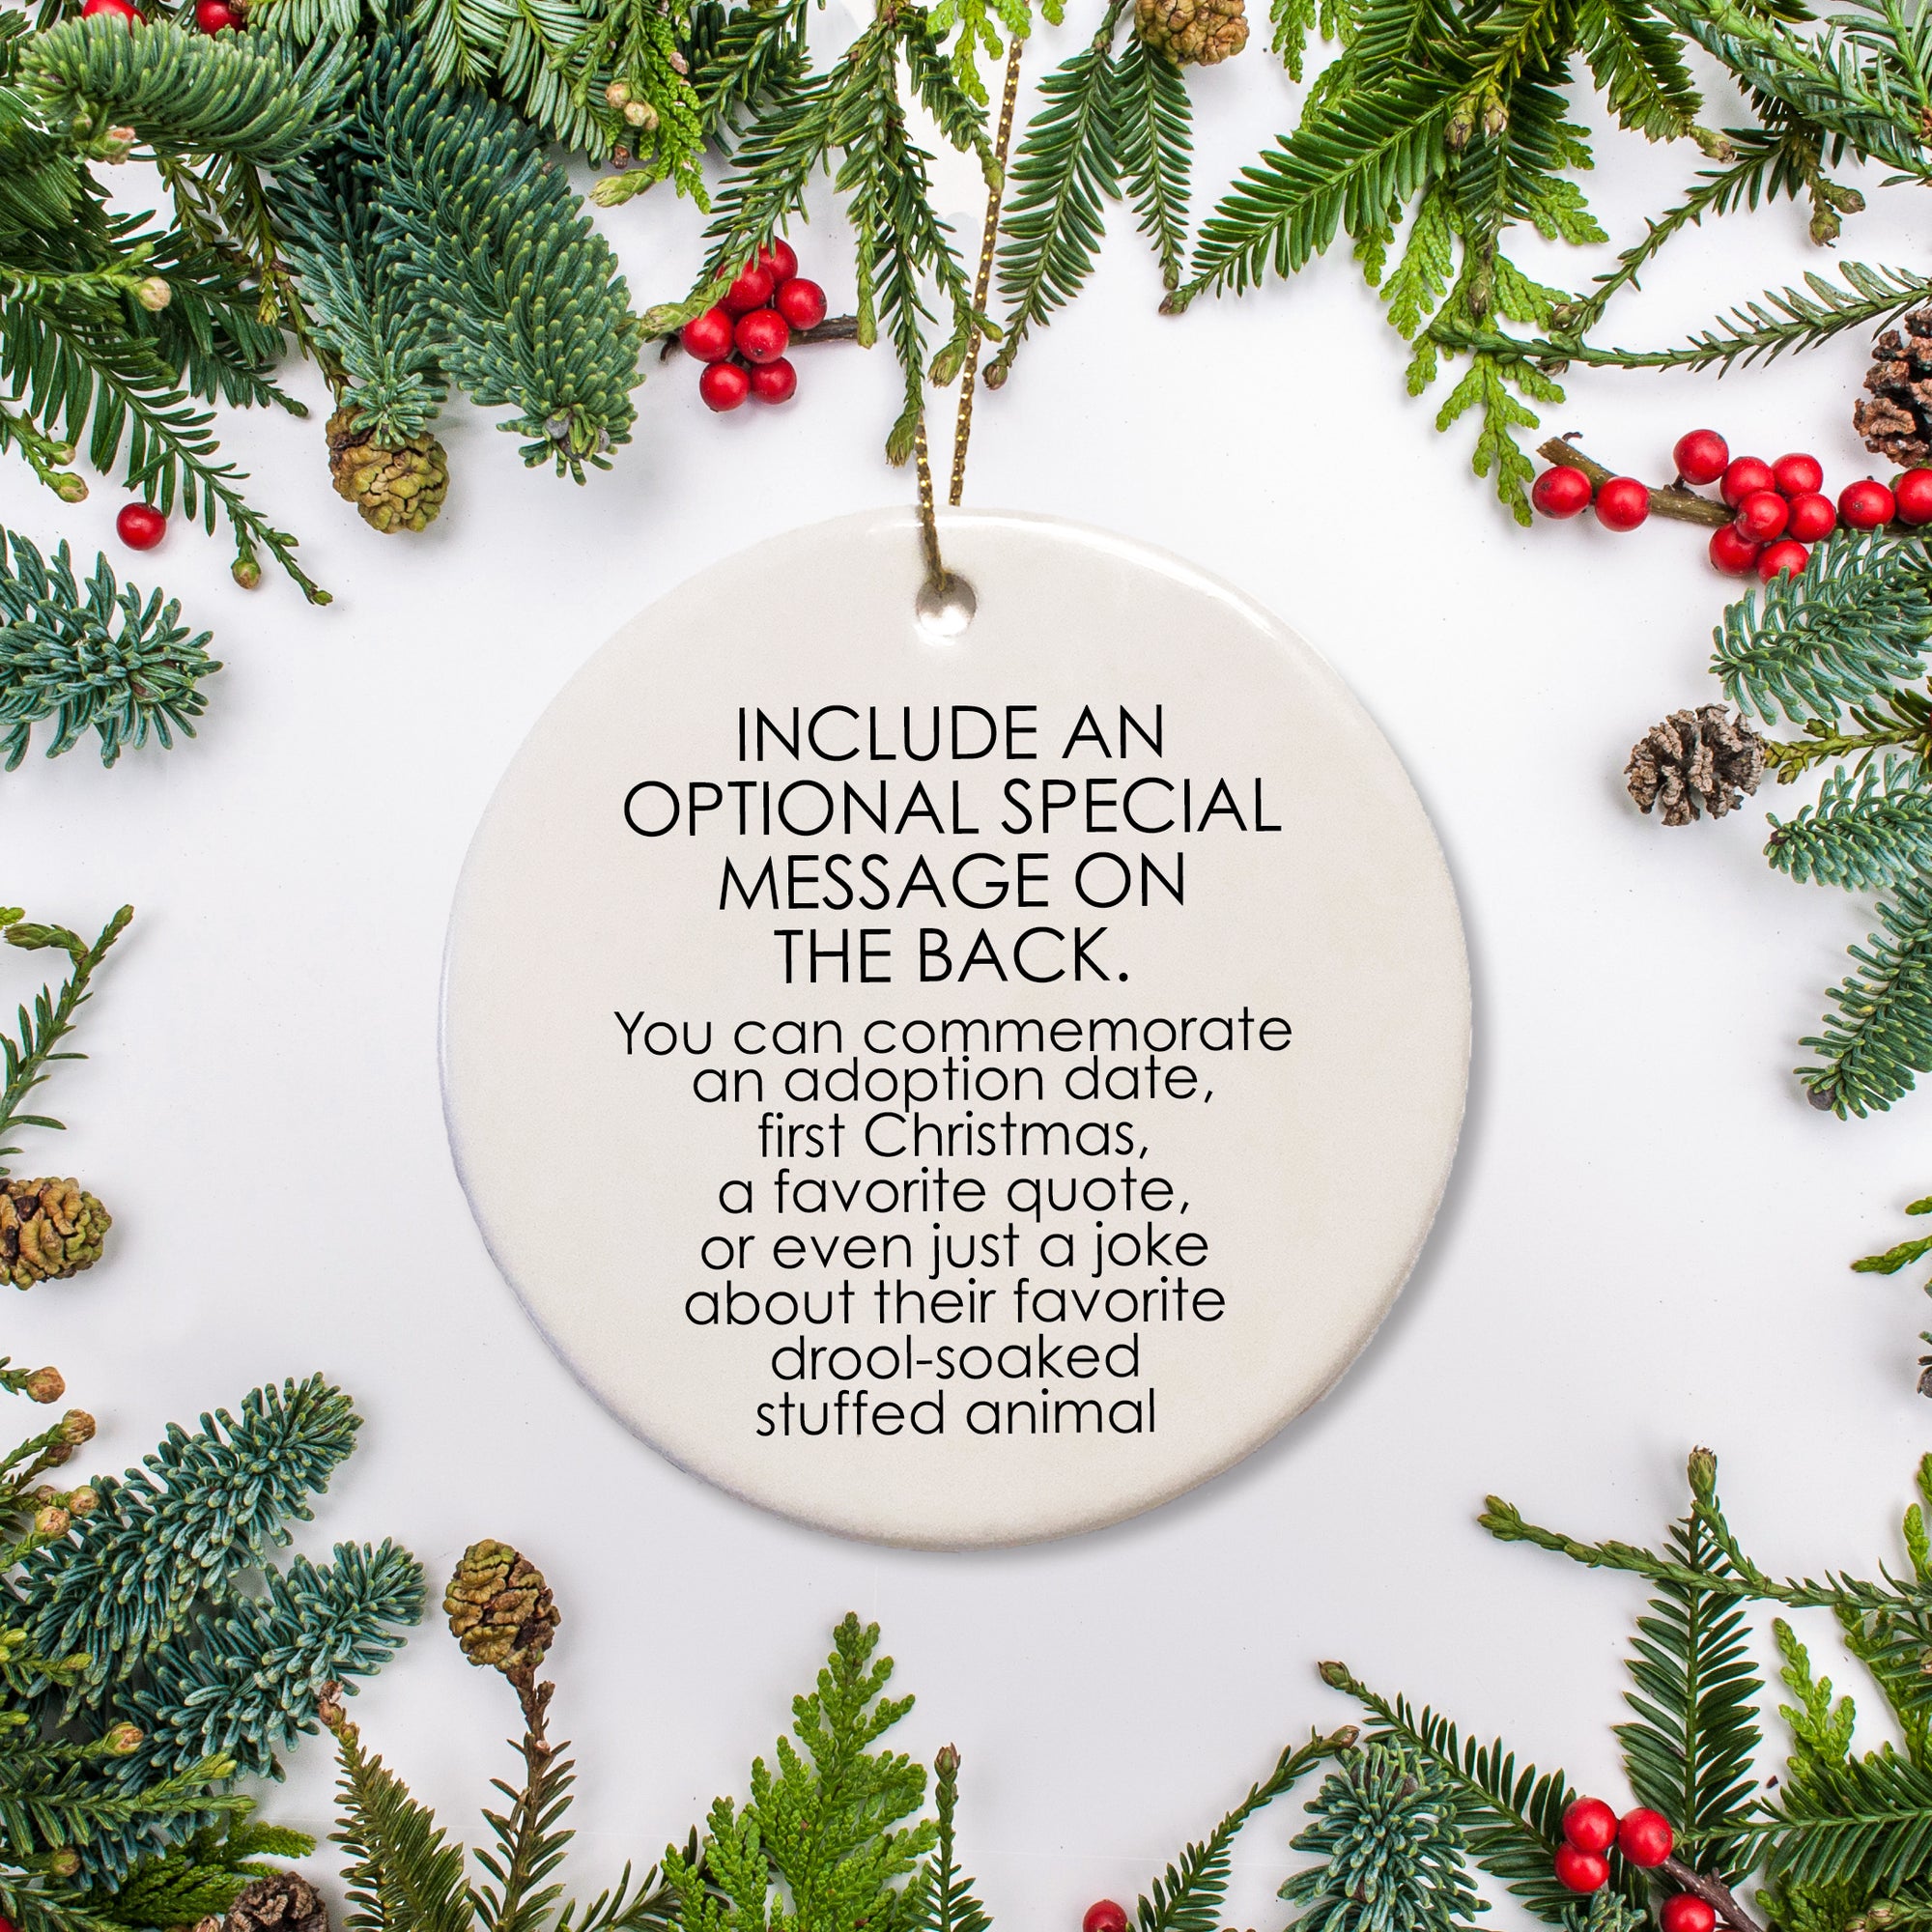 The back of the ornament makes it possible to add an optional message about your pup.  It might be a funny story, a favorite quote, a special date, etc.